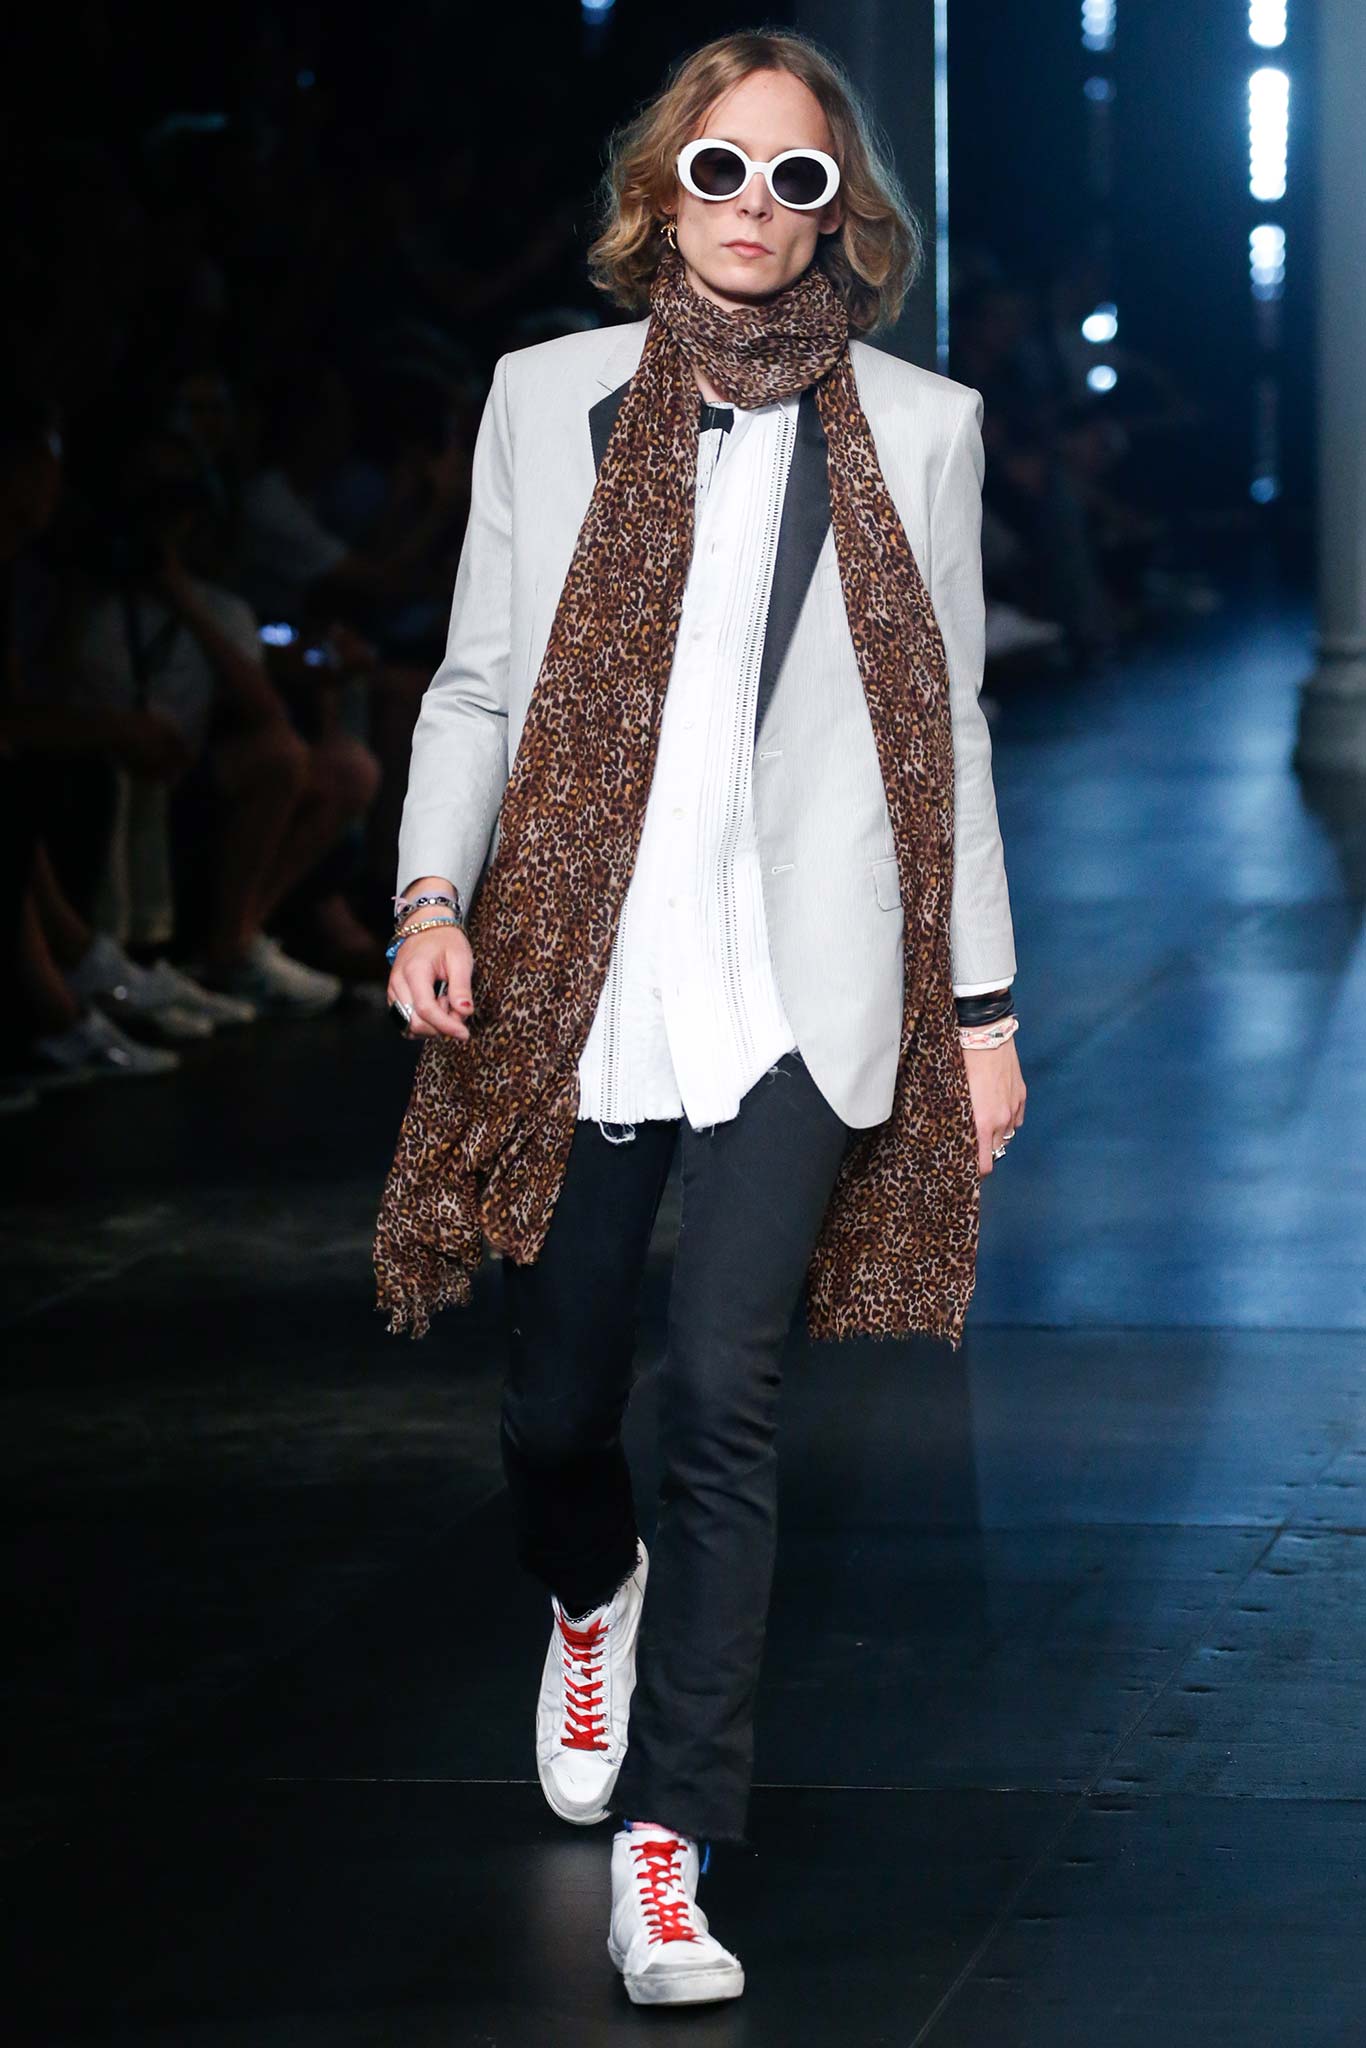 spring-2016-menswear-trends-03a-long-scarves-05